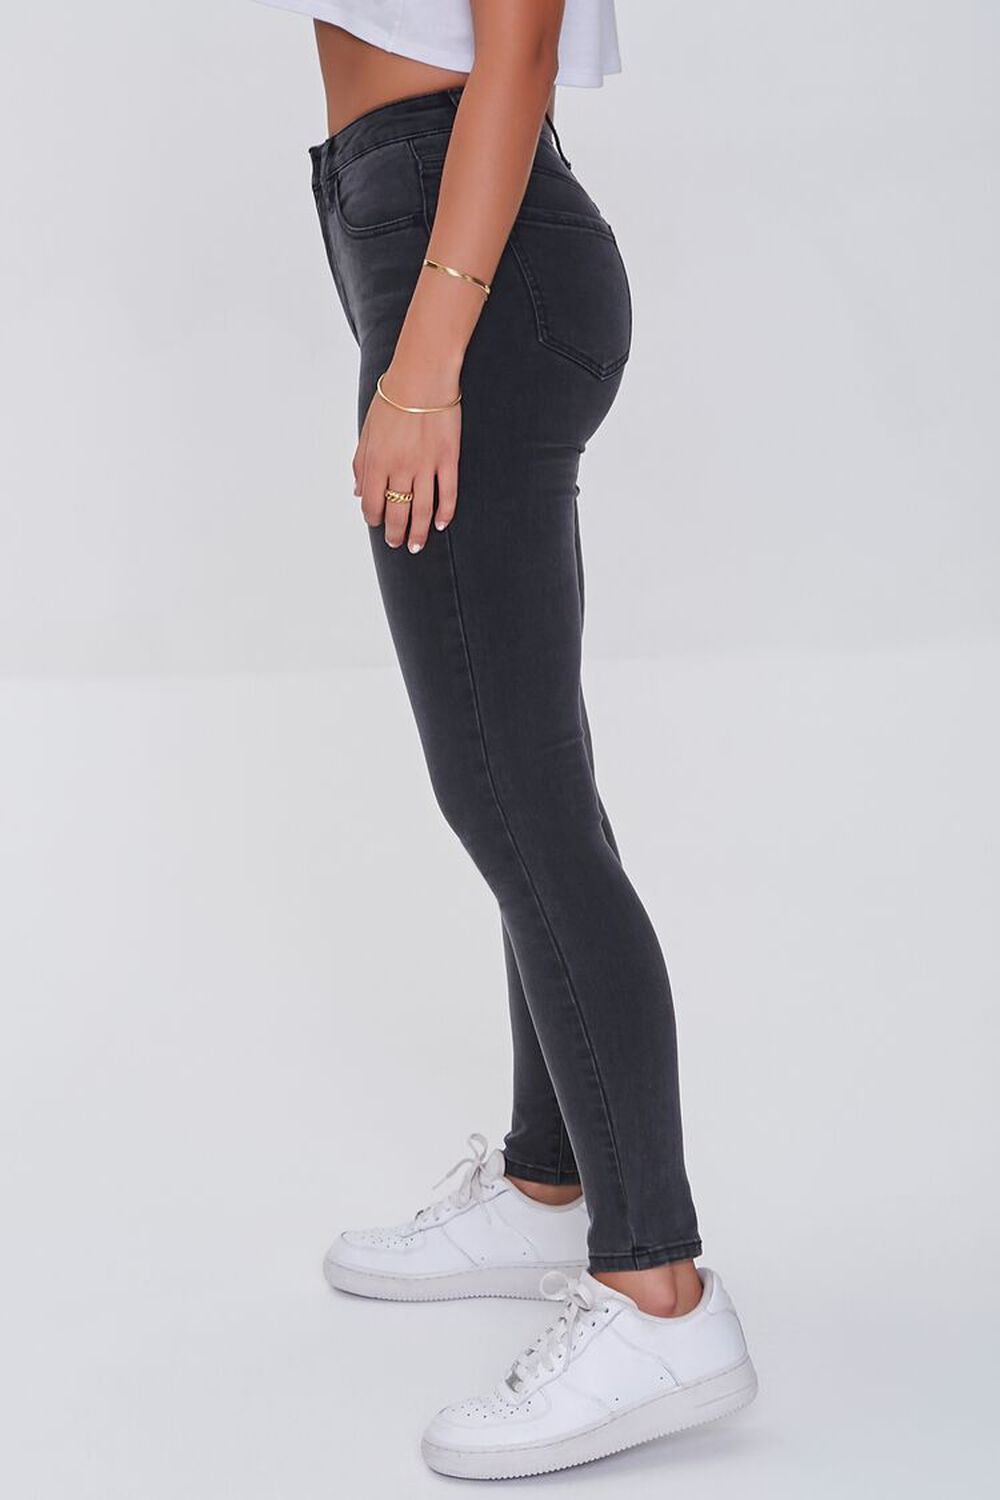 WASHED BLACK Mid-Rise Skinny Jeans, image 3